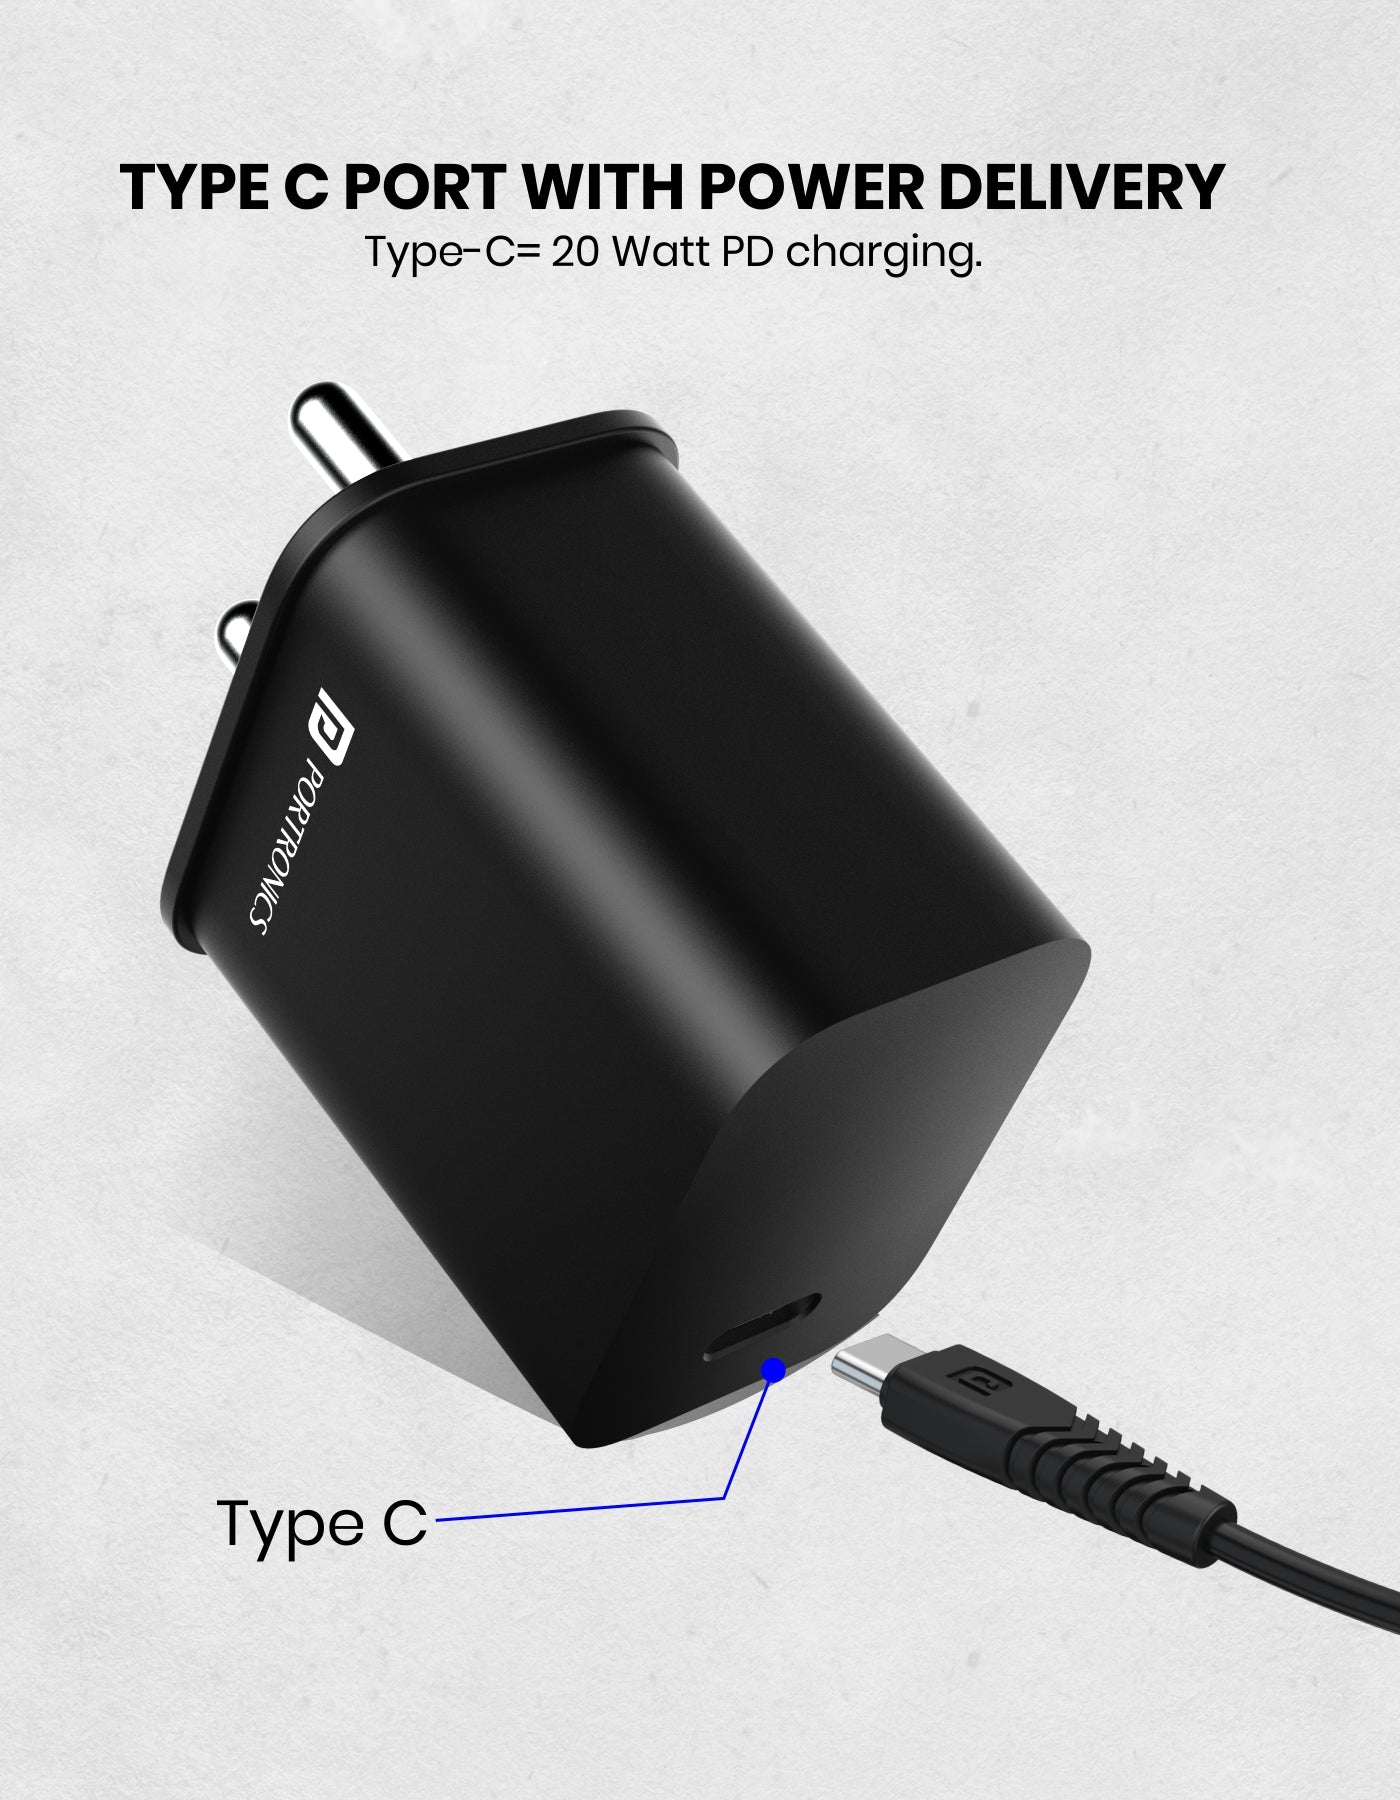 Adapto 20 - 20W Type-C PD Charger/Adapter with Fast Charging BIS certified protection